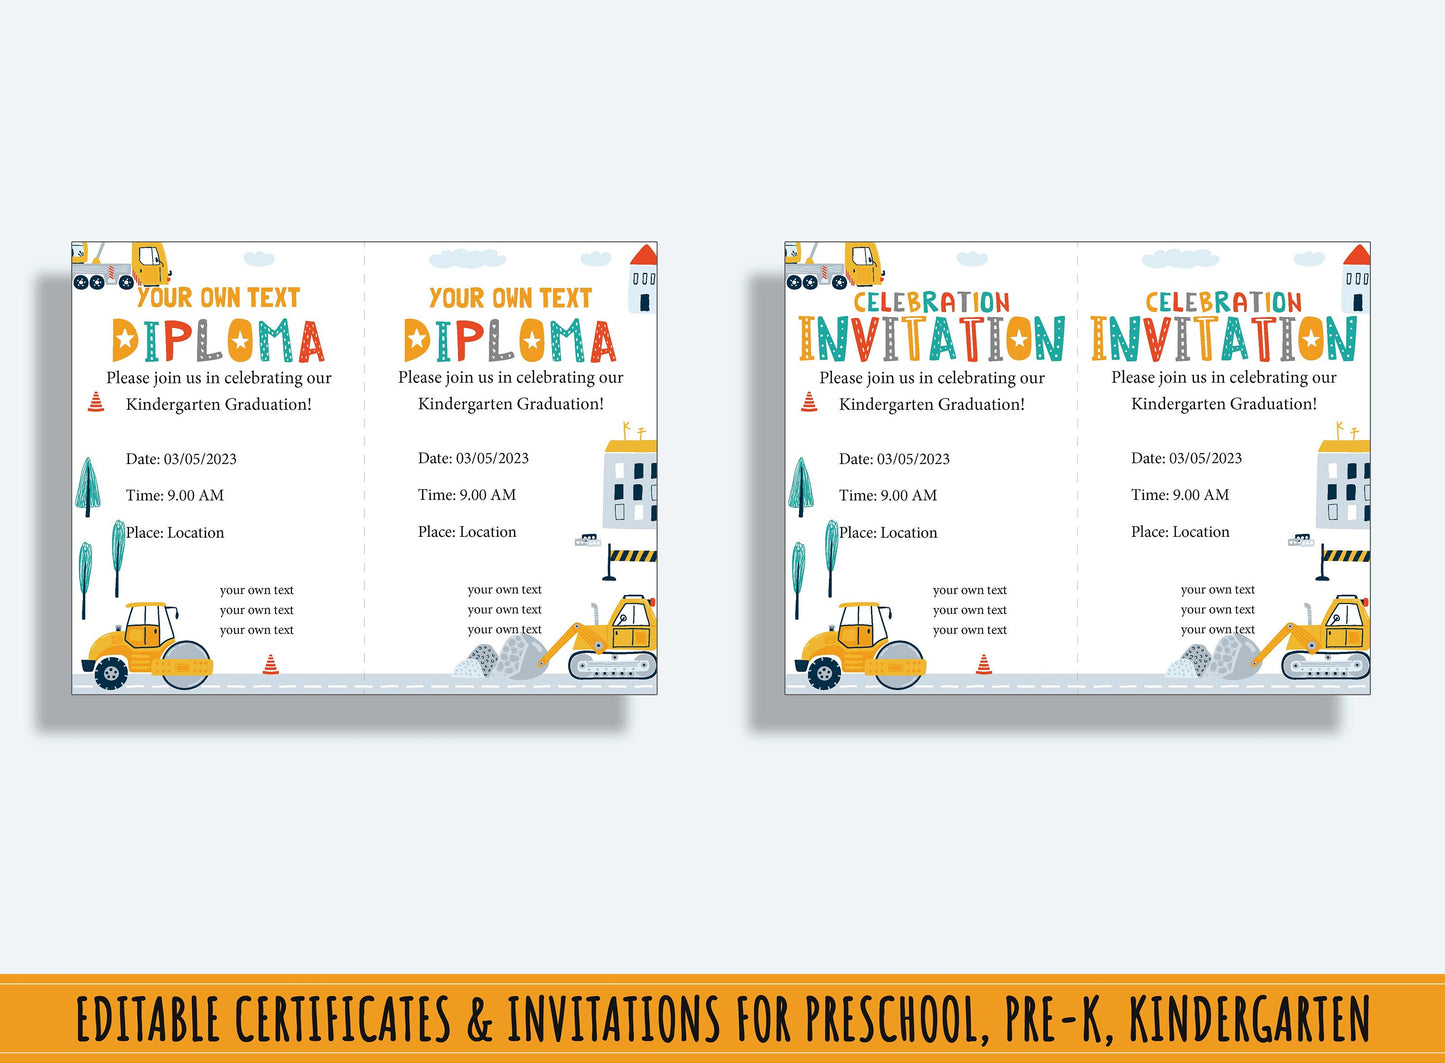 Constructing Success: 37 Editable Pages of Construction-themed Diplomas, Certificates, Invitations for Preschool and Kindergarten, PDF File